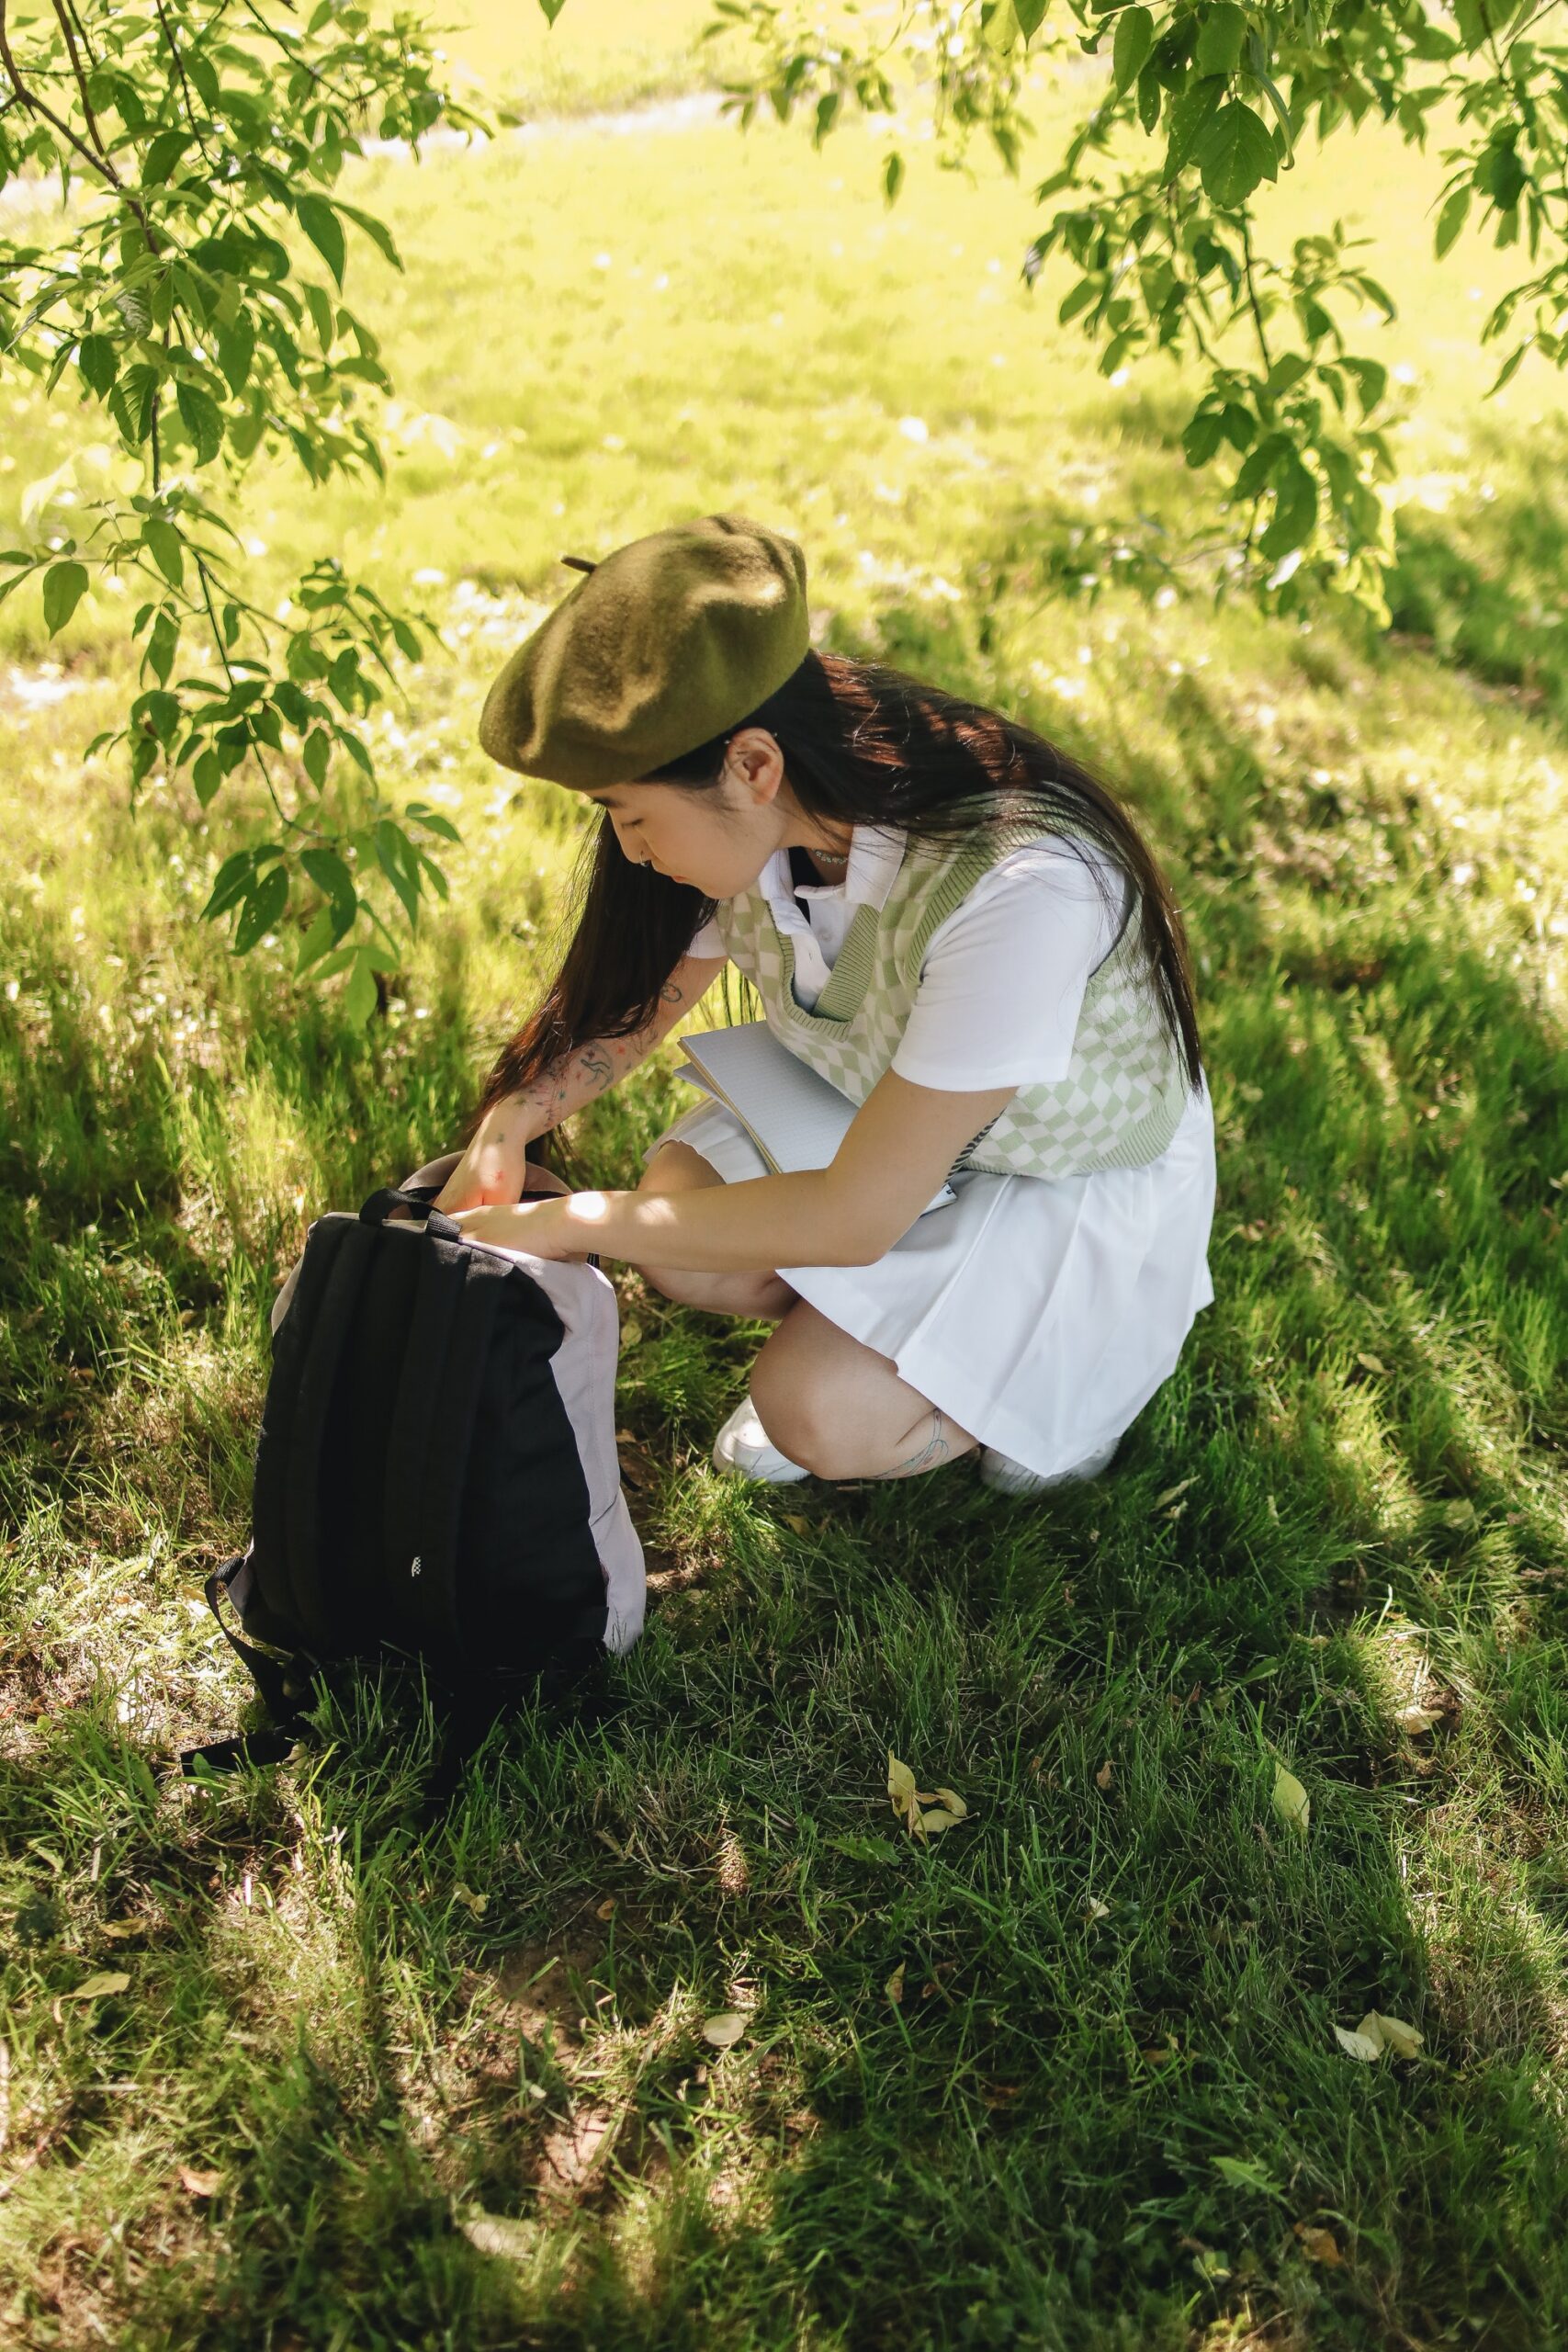 Girl opening a backpack wearing a beret and a green outfit